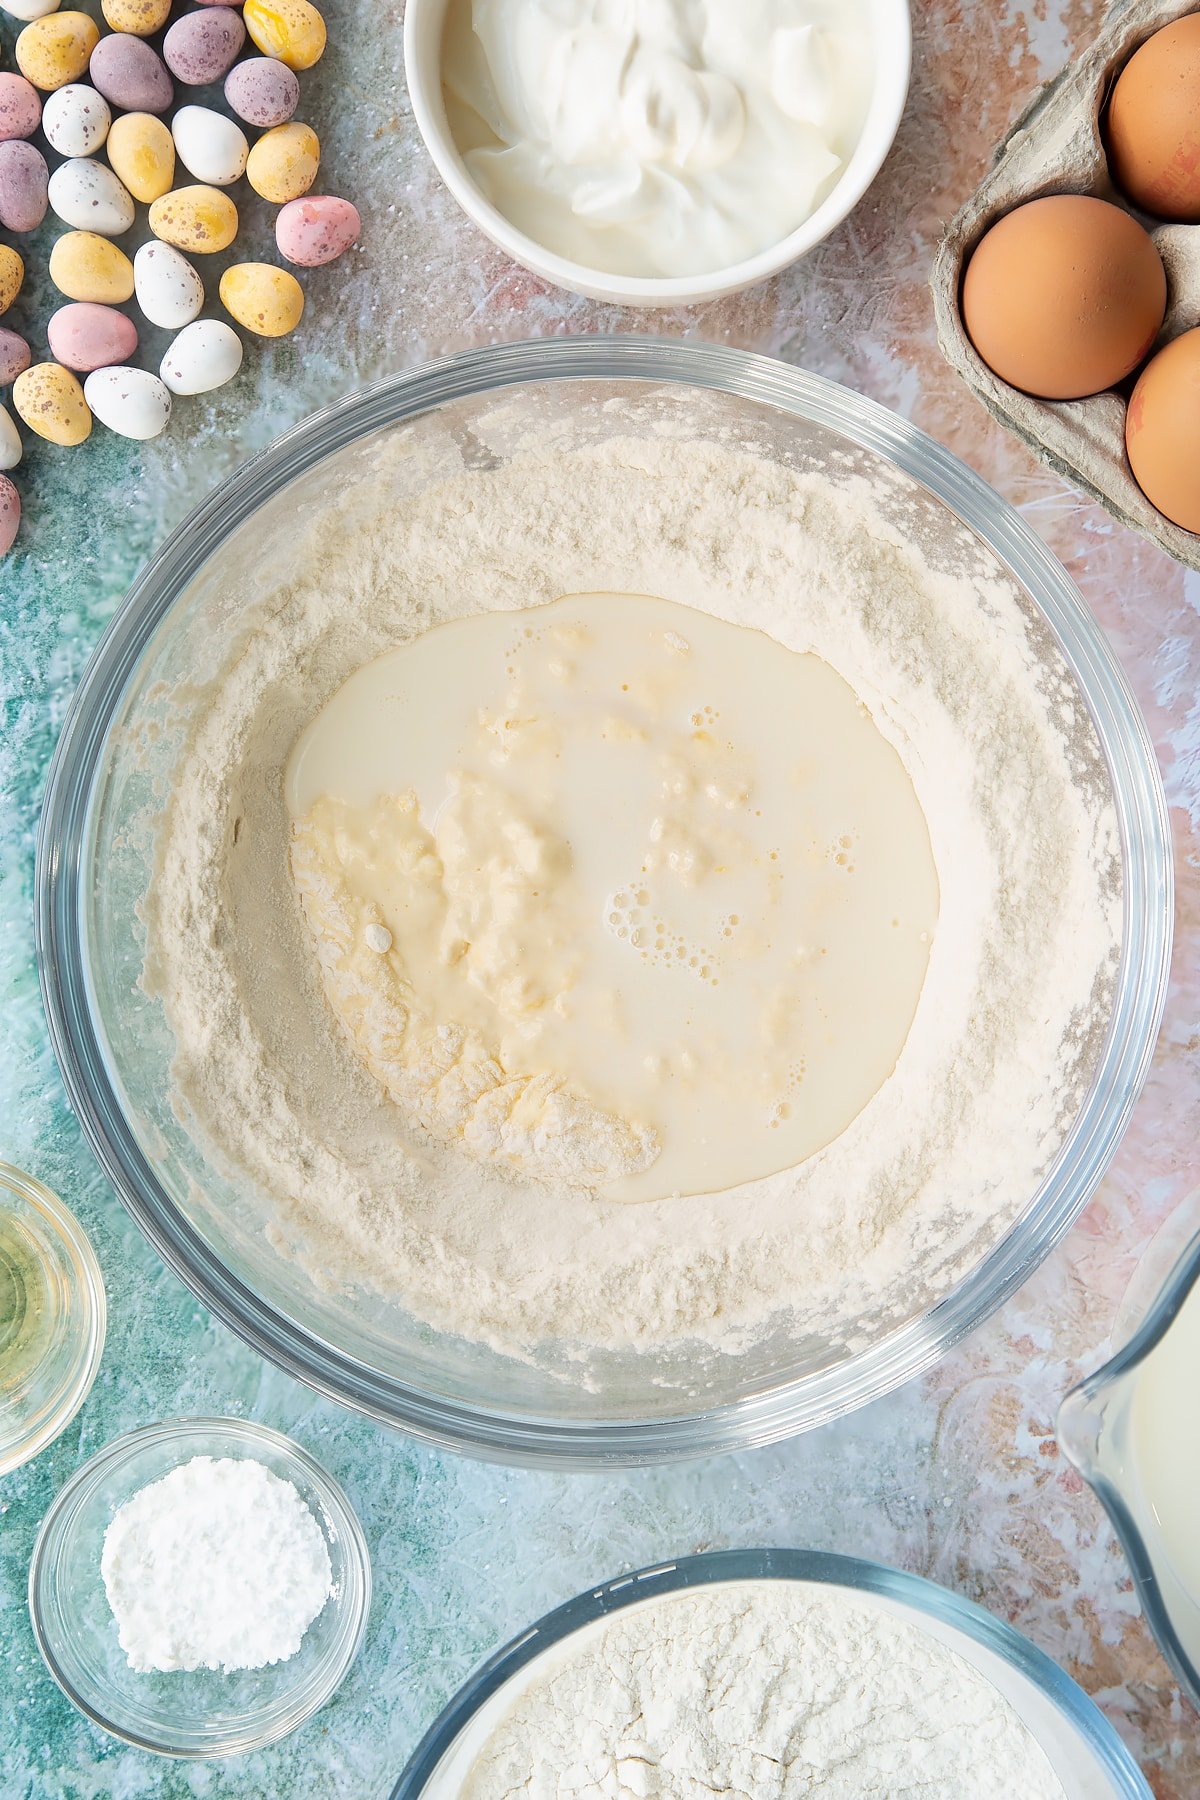 Flour and baking powder in a bowl with a well in the centre filled with whisked creme fraiche, milk and eggs. Ingredients to make Mini Egg pancakes surround the bowl.